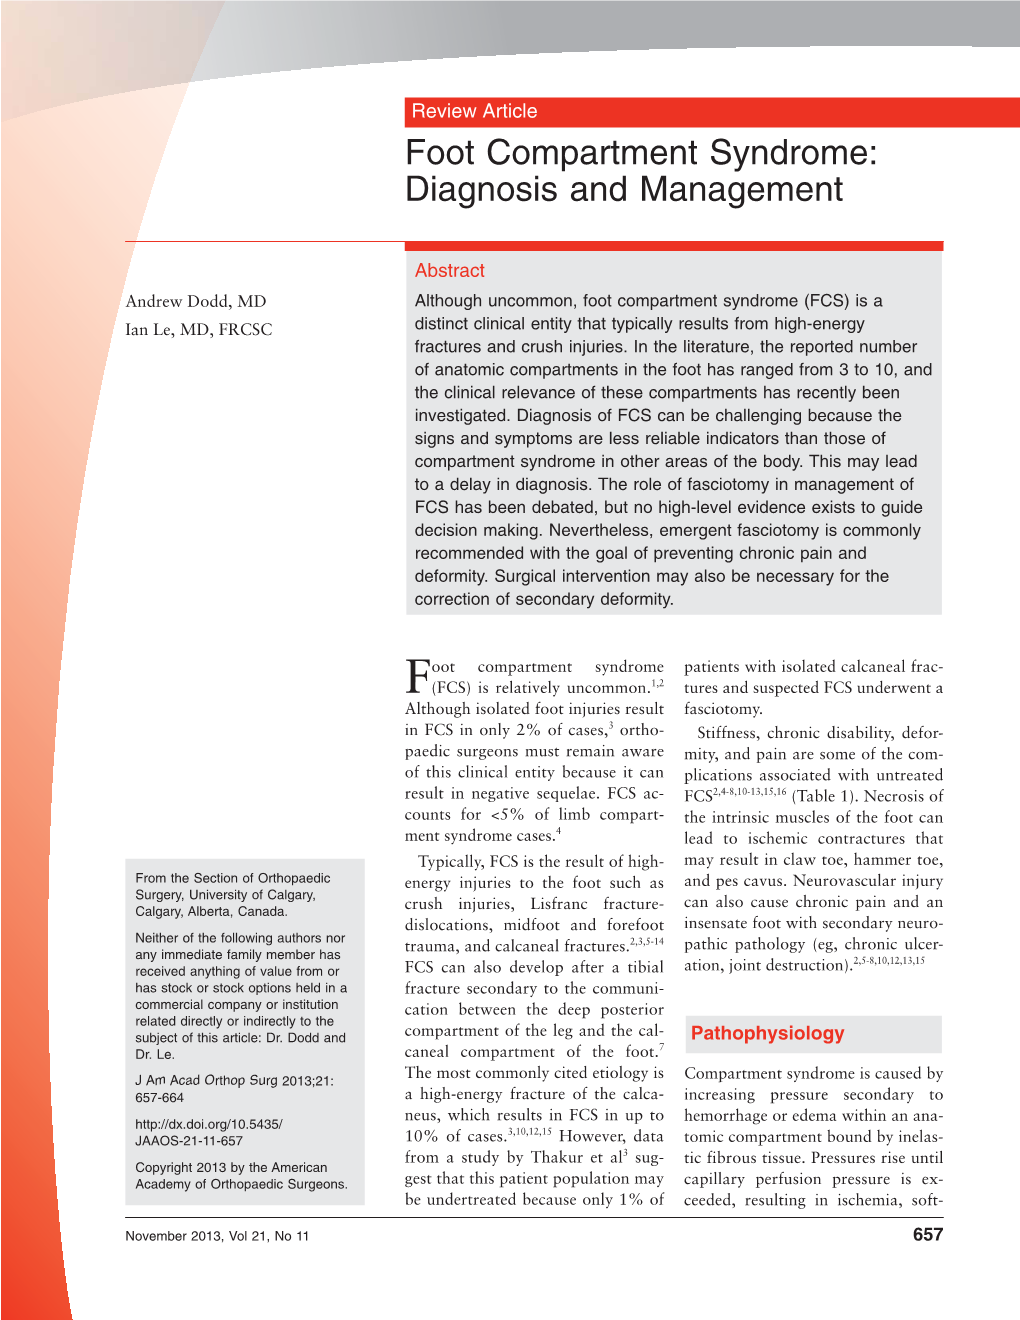 Foot Compartment Syndrome: Diagnosis and Management